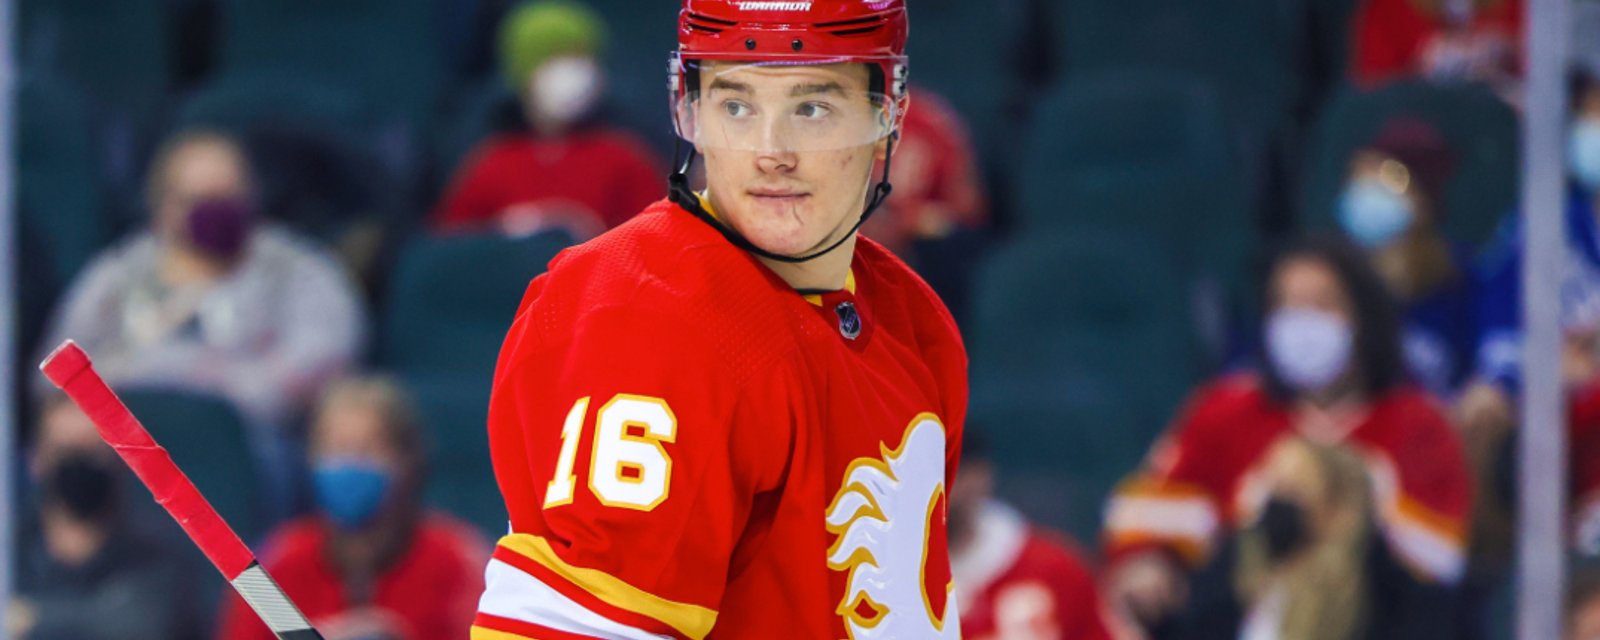 Classy move by Flames’ Zadorov towards rival Maple Leafs